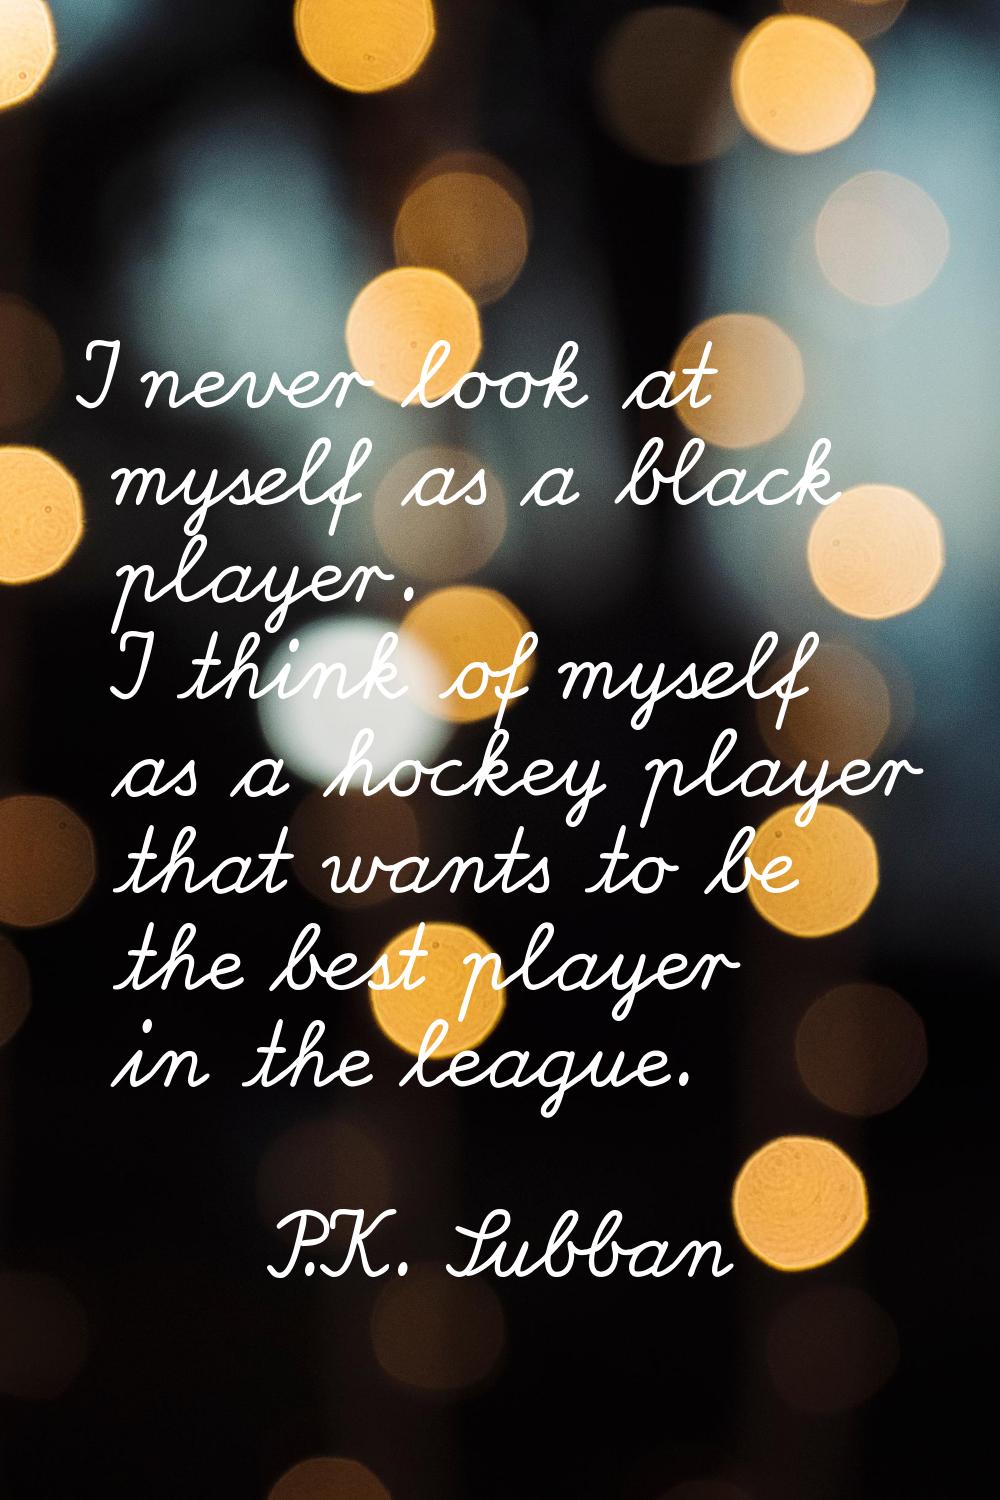 I never look at myself as a black player. I think of myself as a hockey player that wants to be the